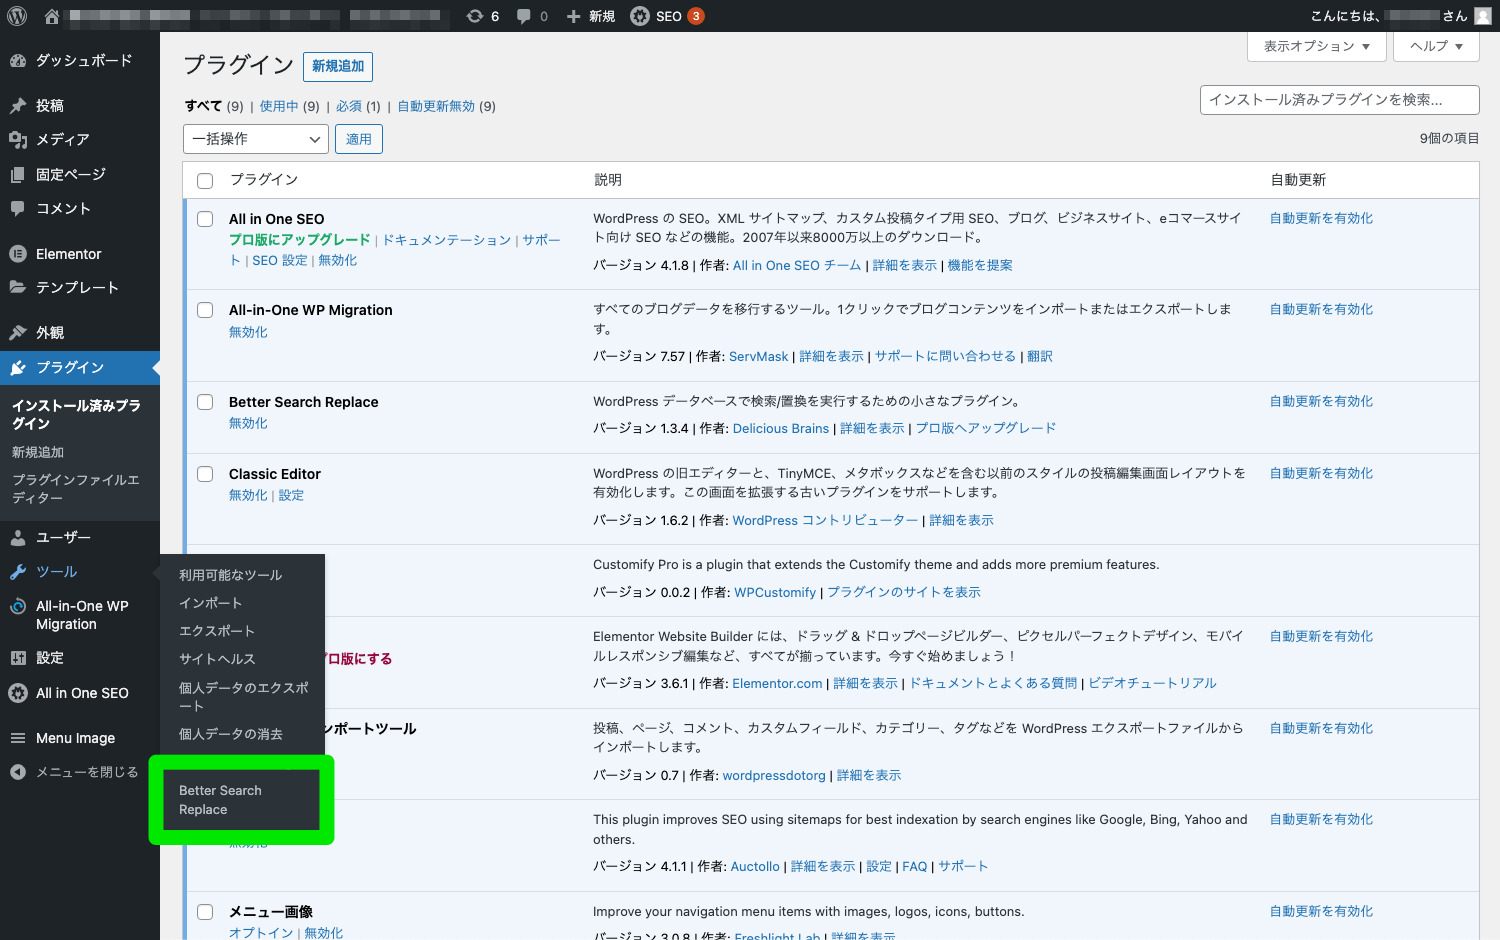 BetterSearchReplaceの実行はメニュー内「ツール」から